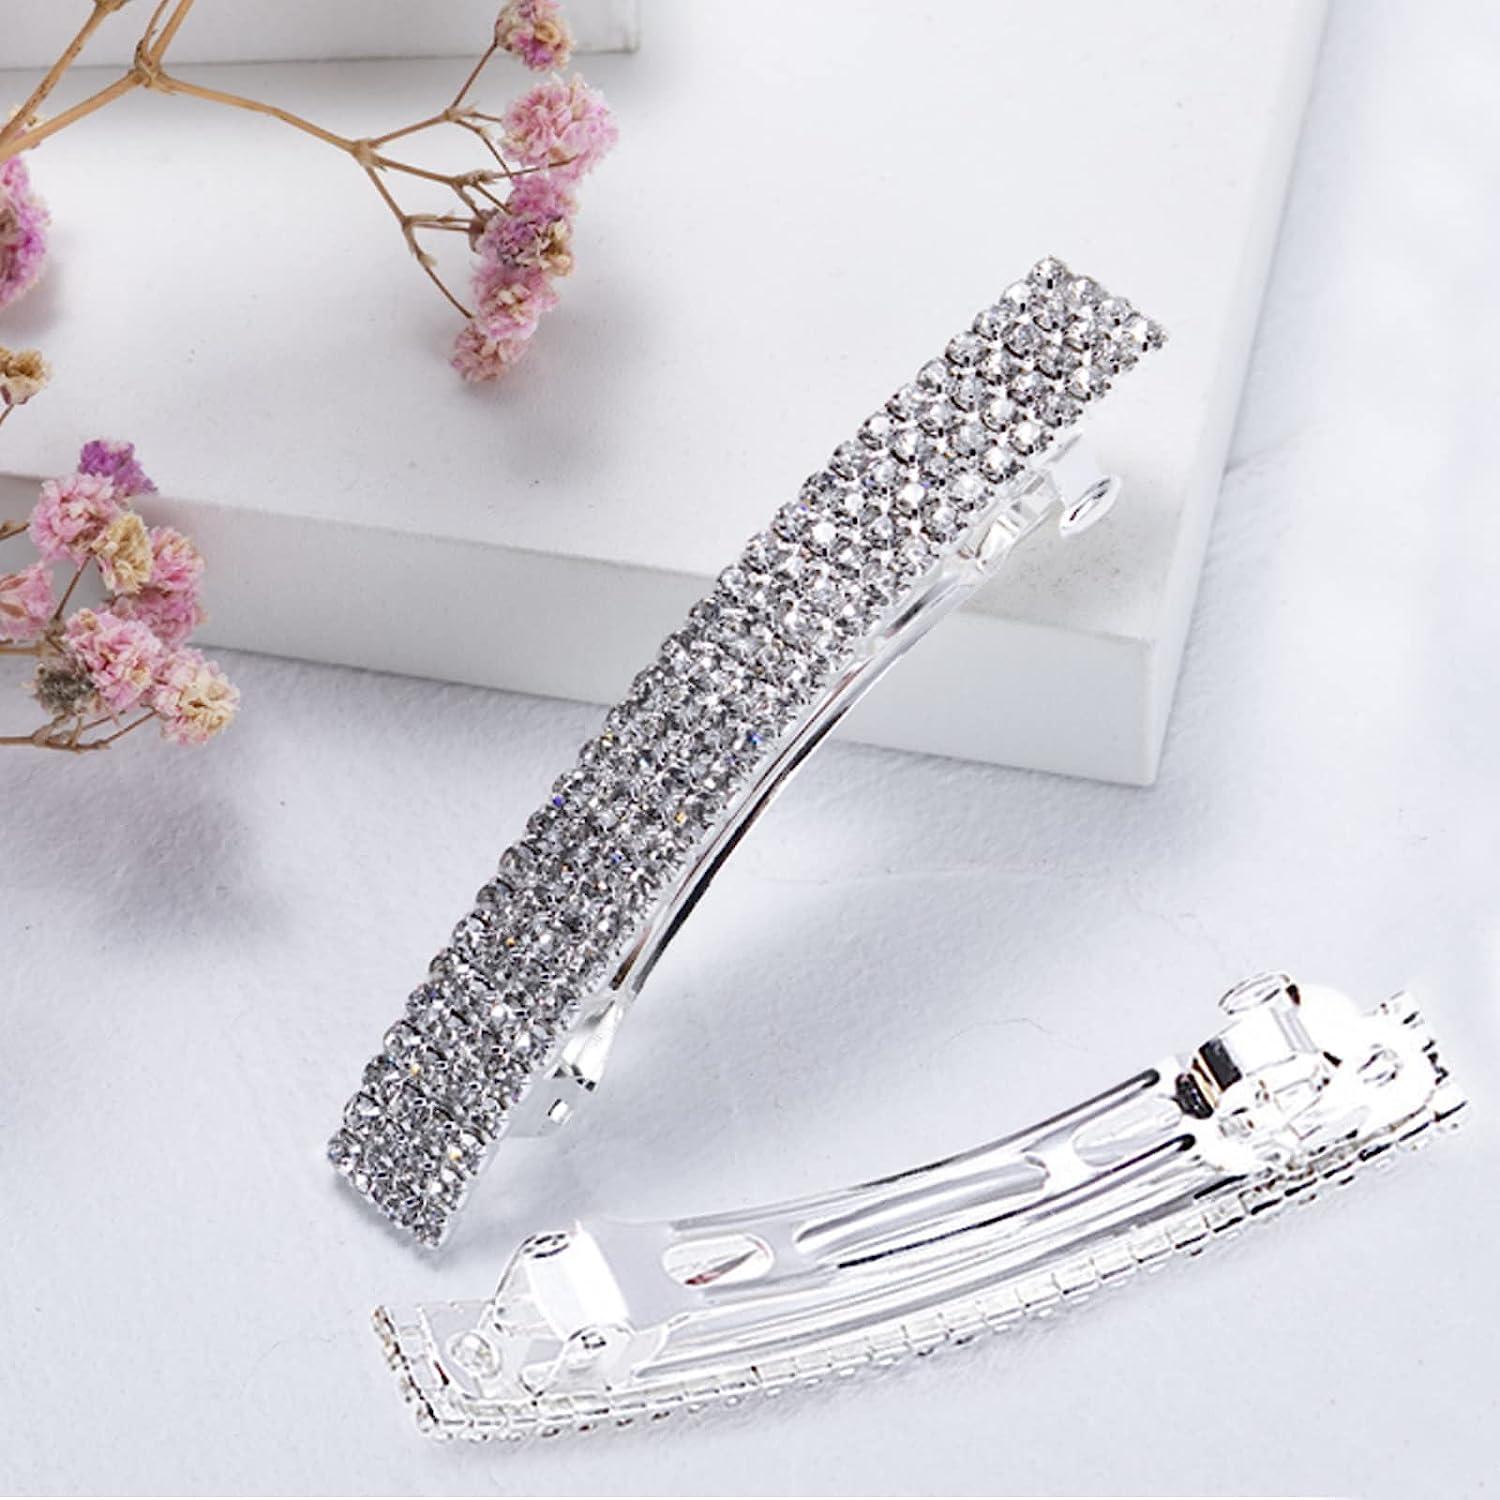  Silver Color Rhinestone Shoe Clips (2 pcs), Clips for